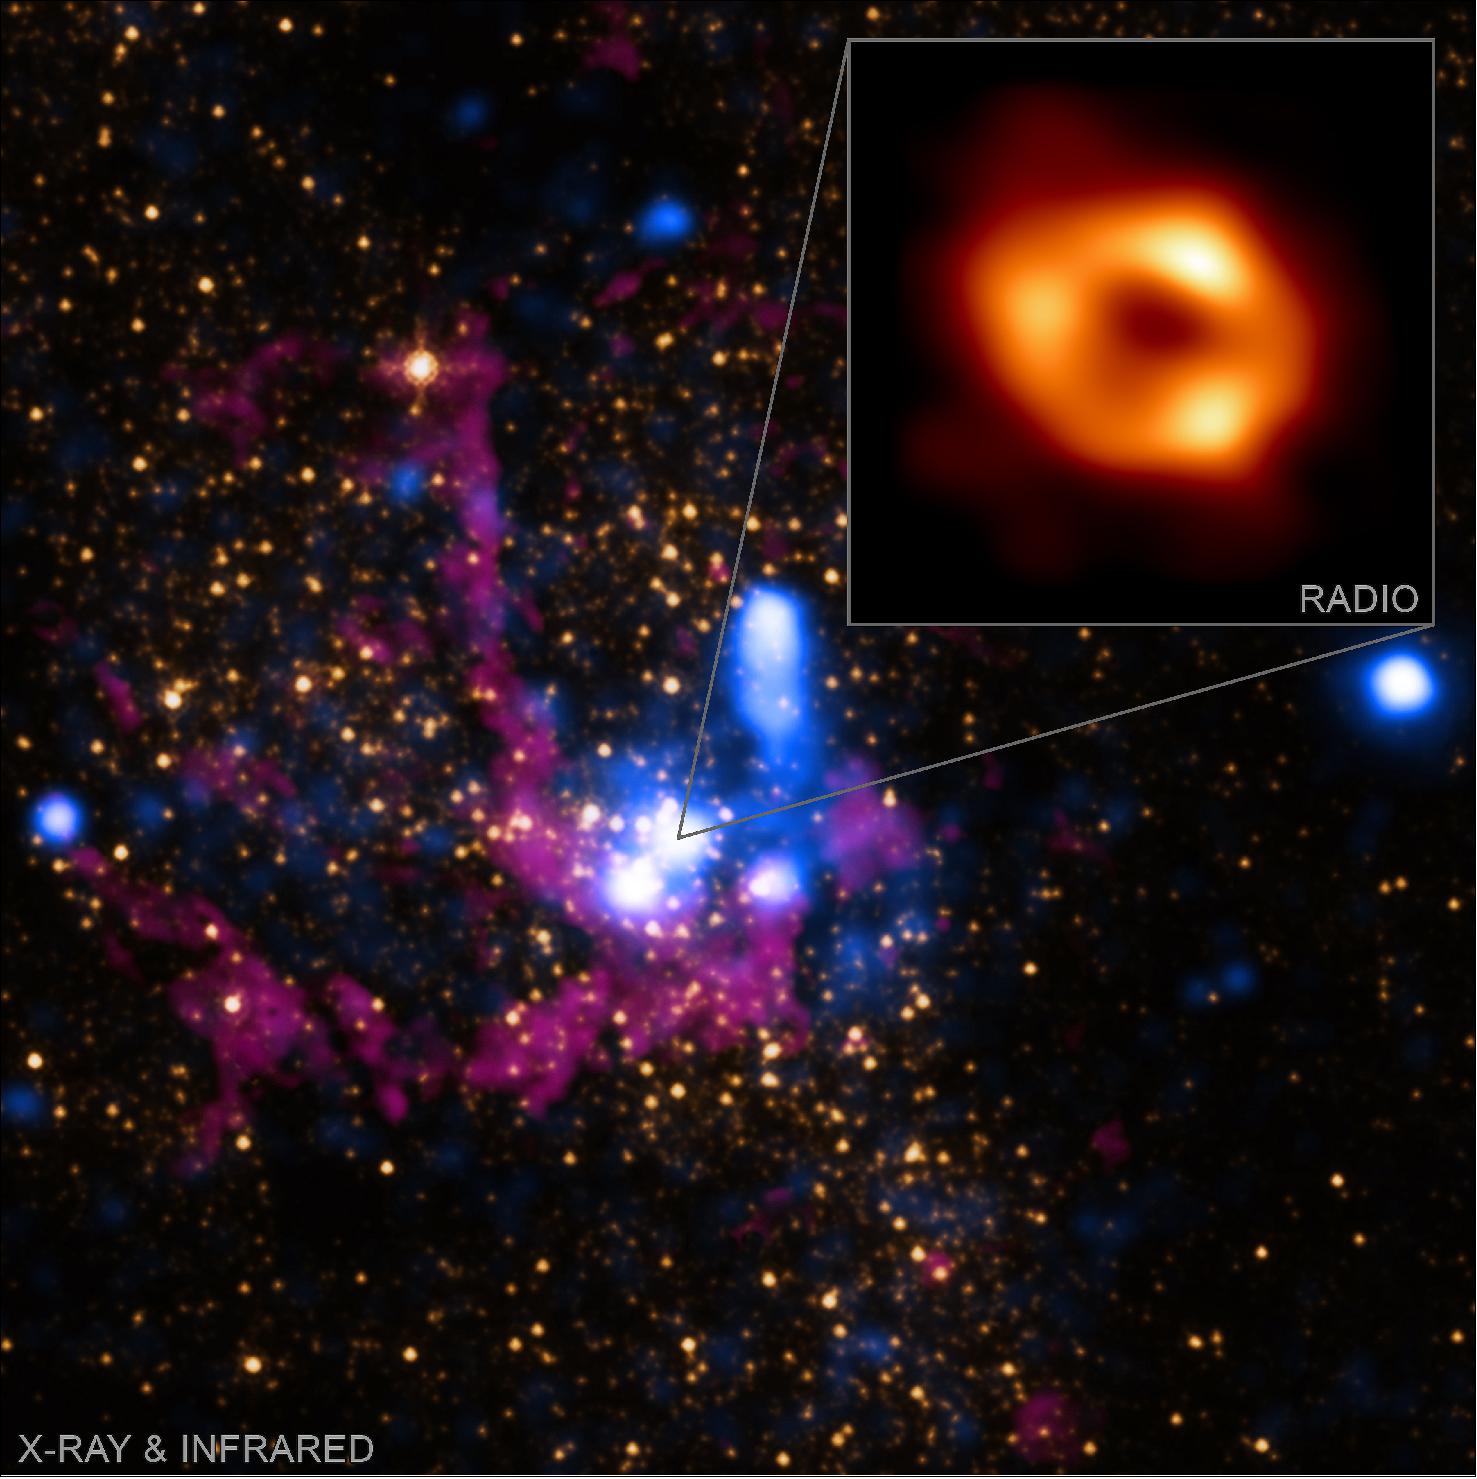 Figure 24: This composite image of the supermassive black hole at the center of the Milky Way galaxy includes data from multiple NASA telescopes. The inset image from the Event Horizon Telescope shows the region around the black hole’s event horizon, the boundary beyond which not even light can escape [image credit: X-ray: NASA/CXC/SAO; IR: NASA/HST/STScI. Inset: Radio (EHT Collaboration)]